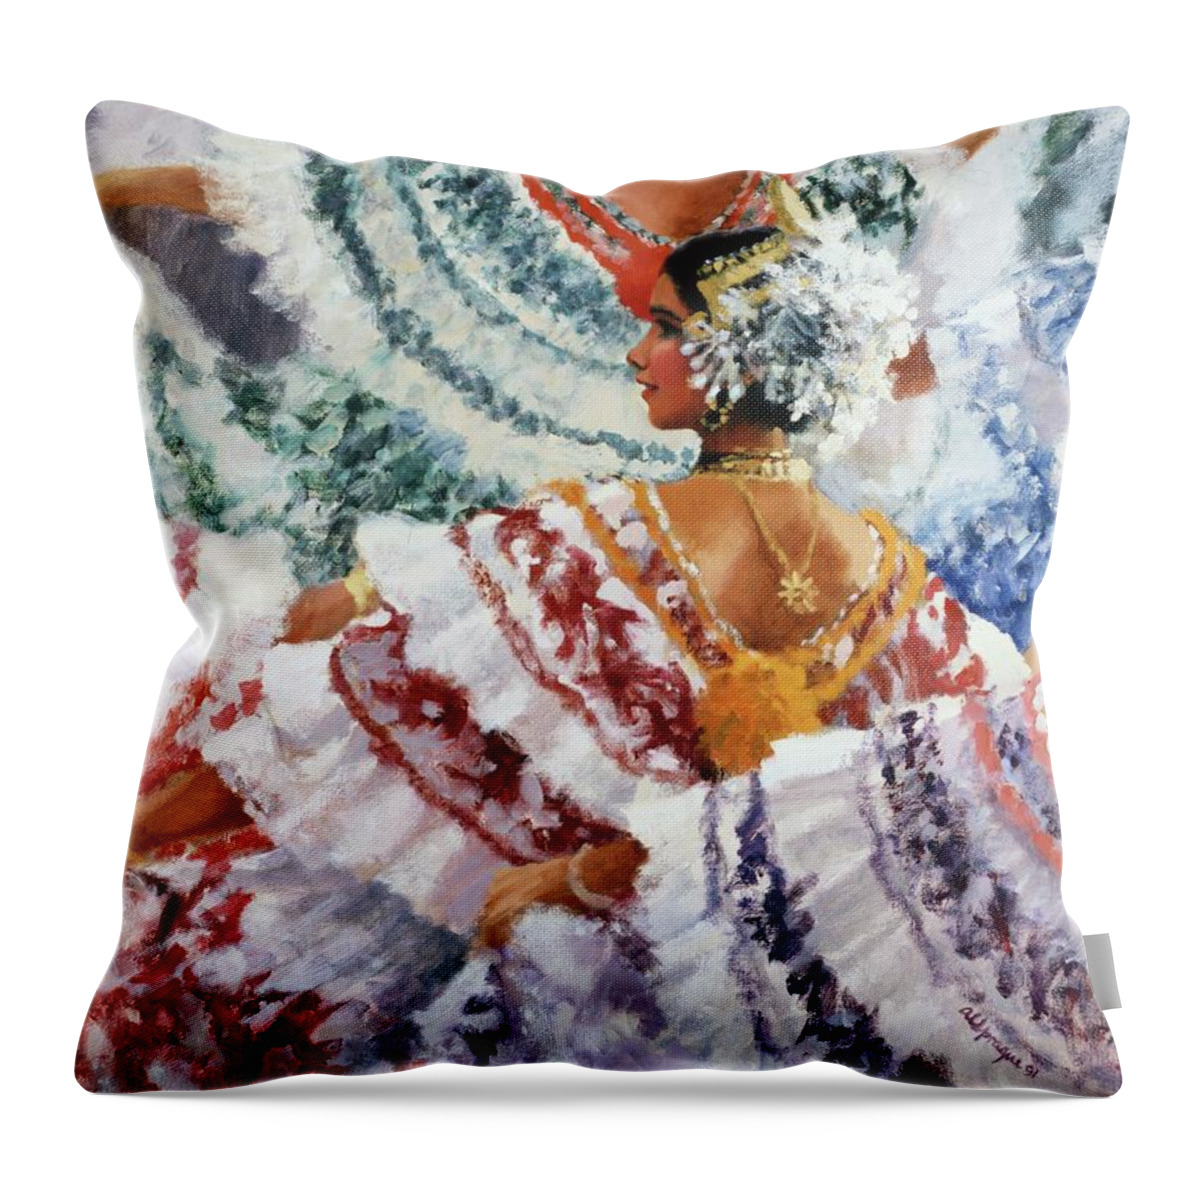 Panama Throw Pillow featuring the painting The Dance by Al Sprague